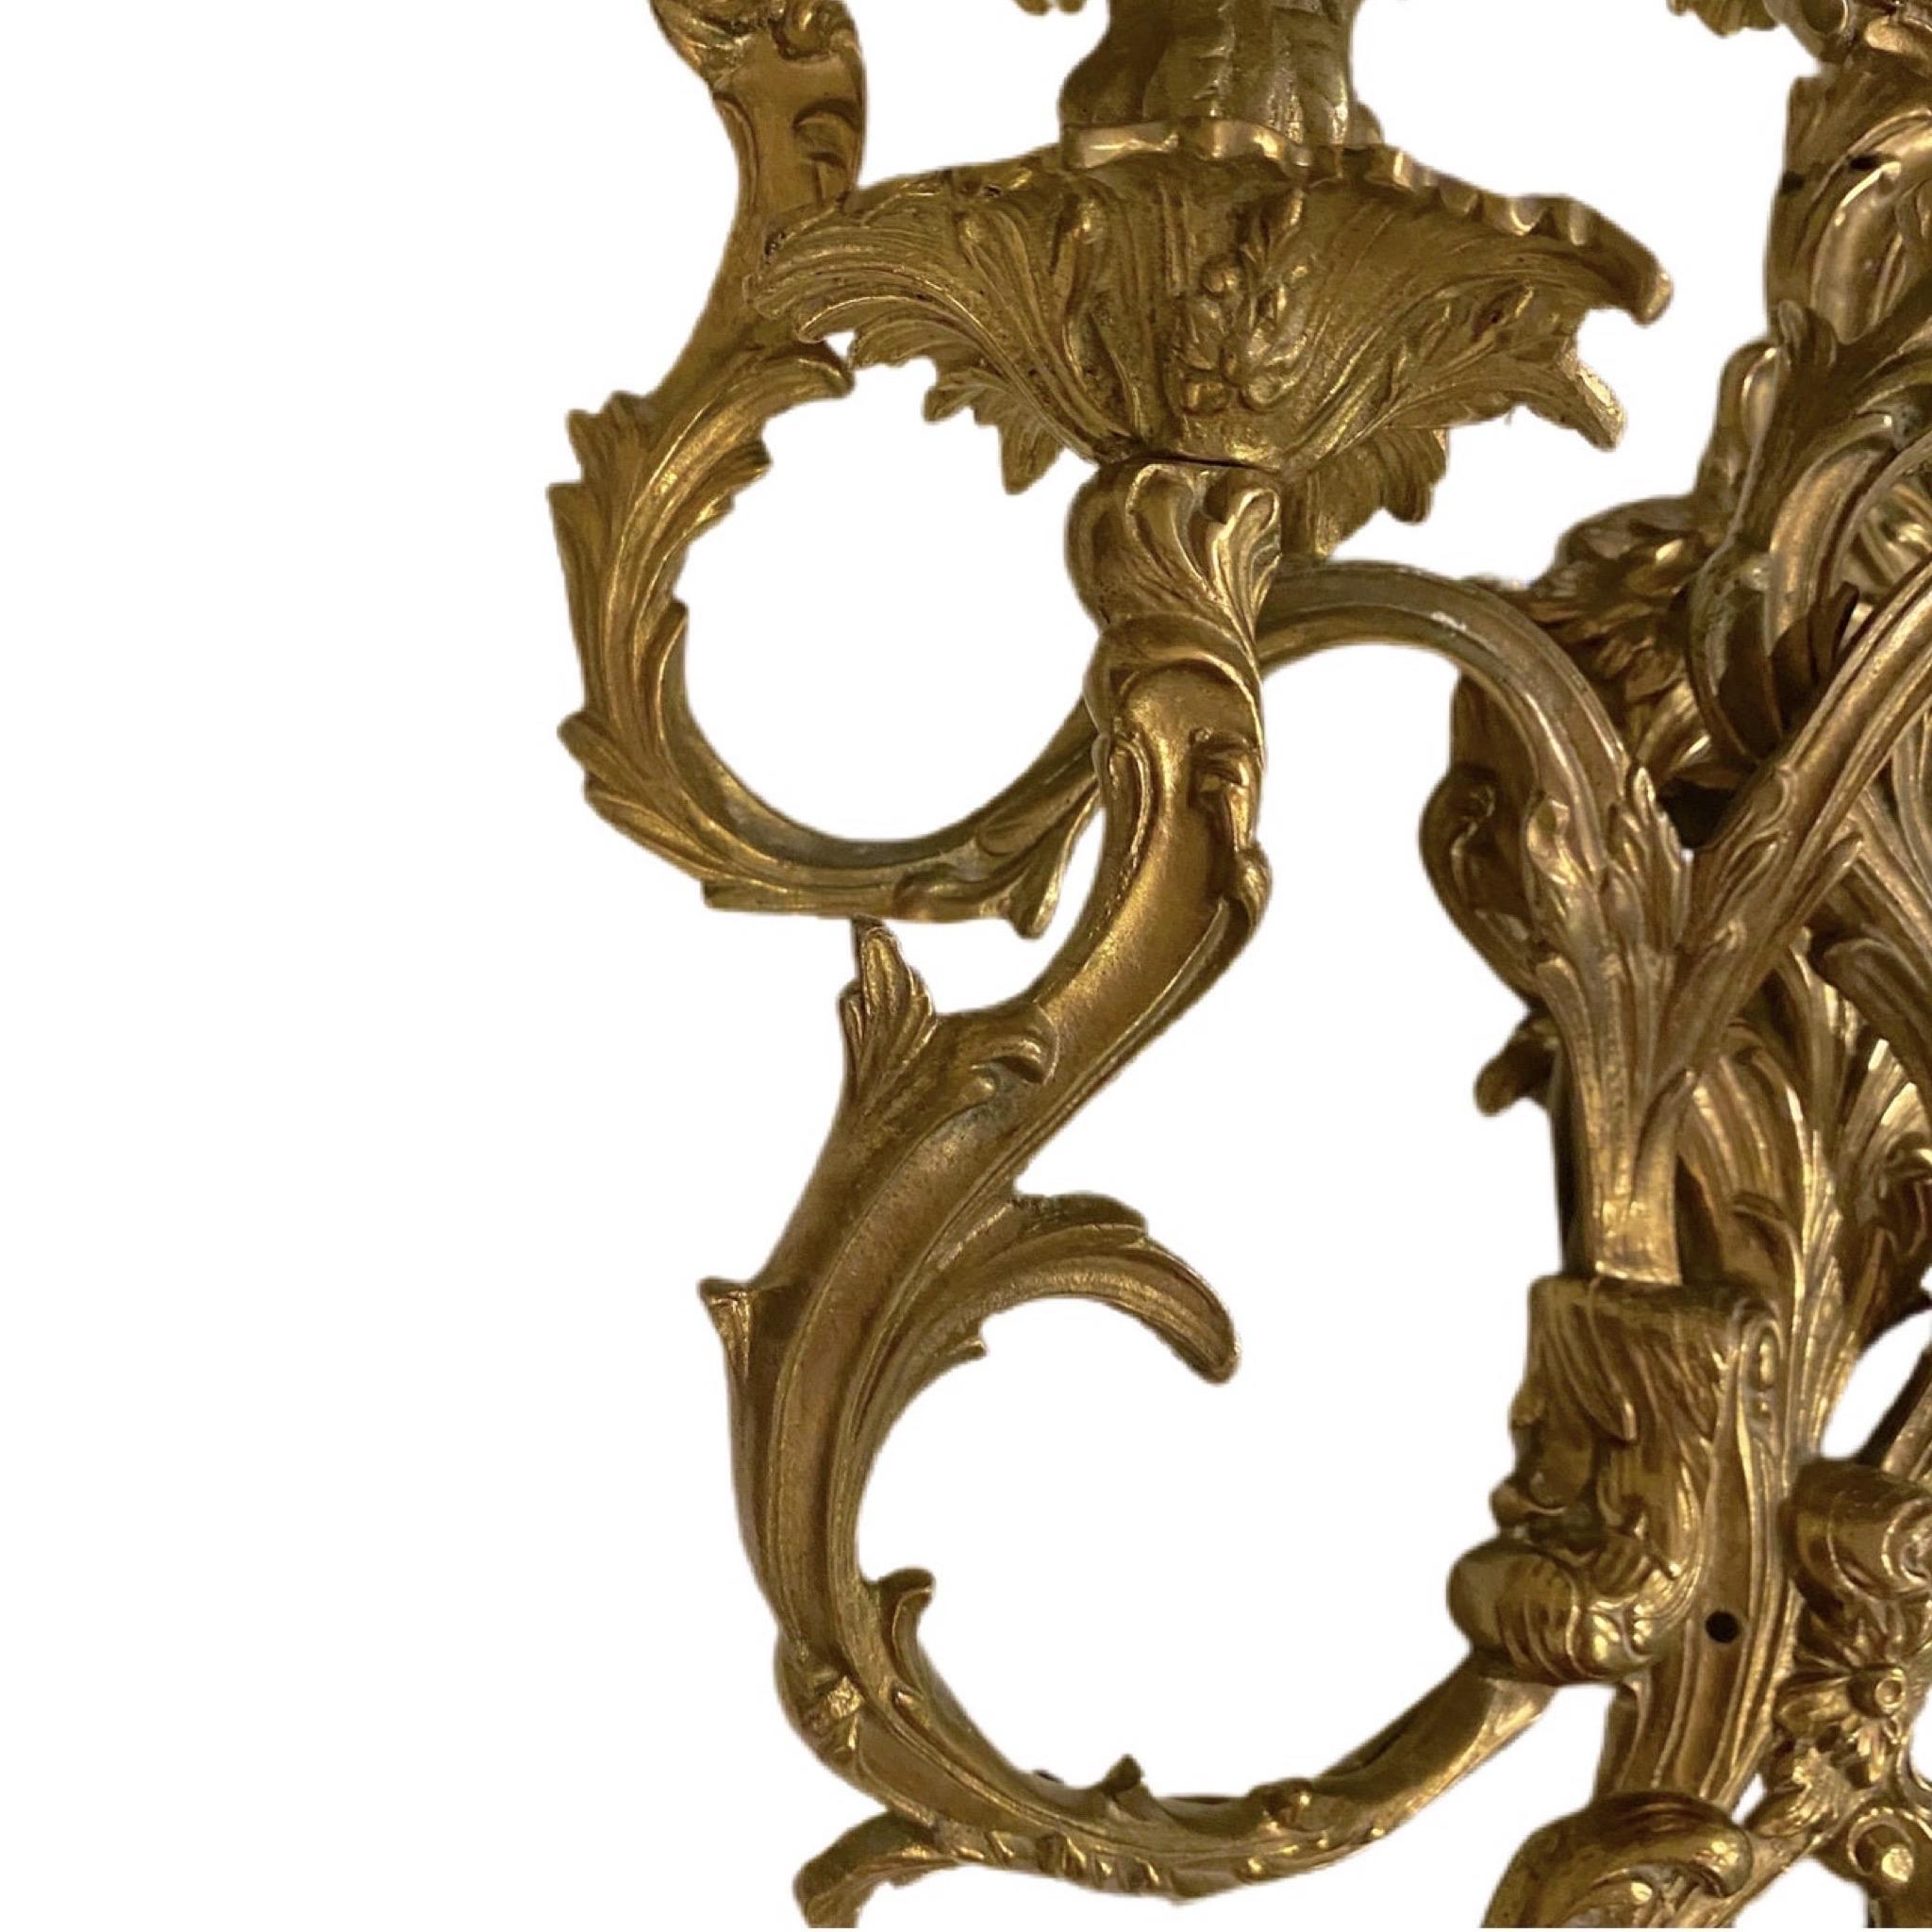 Bronze 19th Century French Rococo 5 Arm Wired Wall Sconces - a Pair For Sale